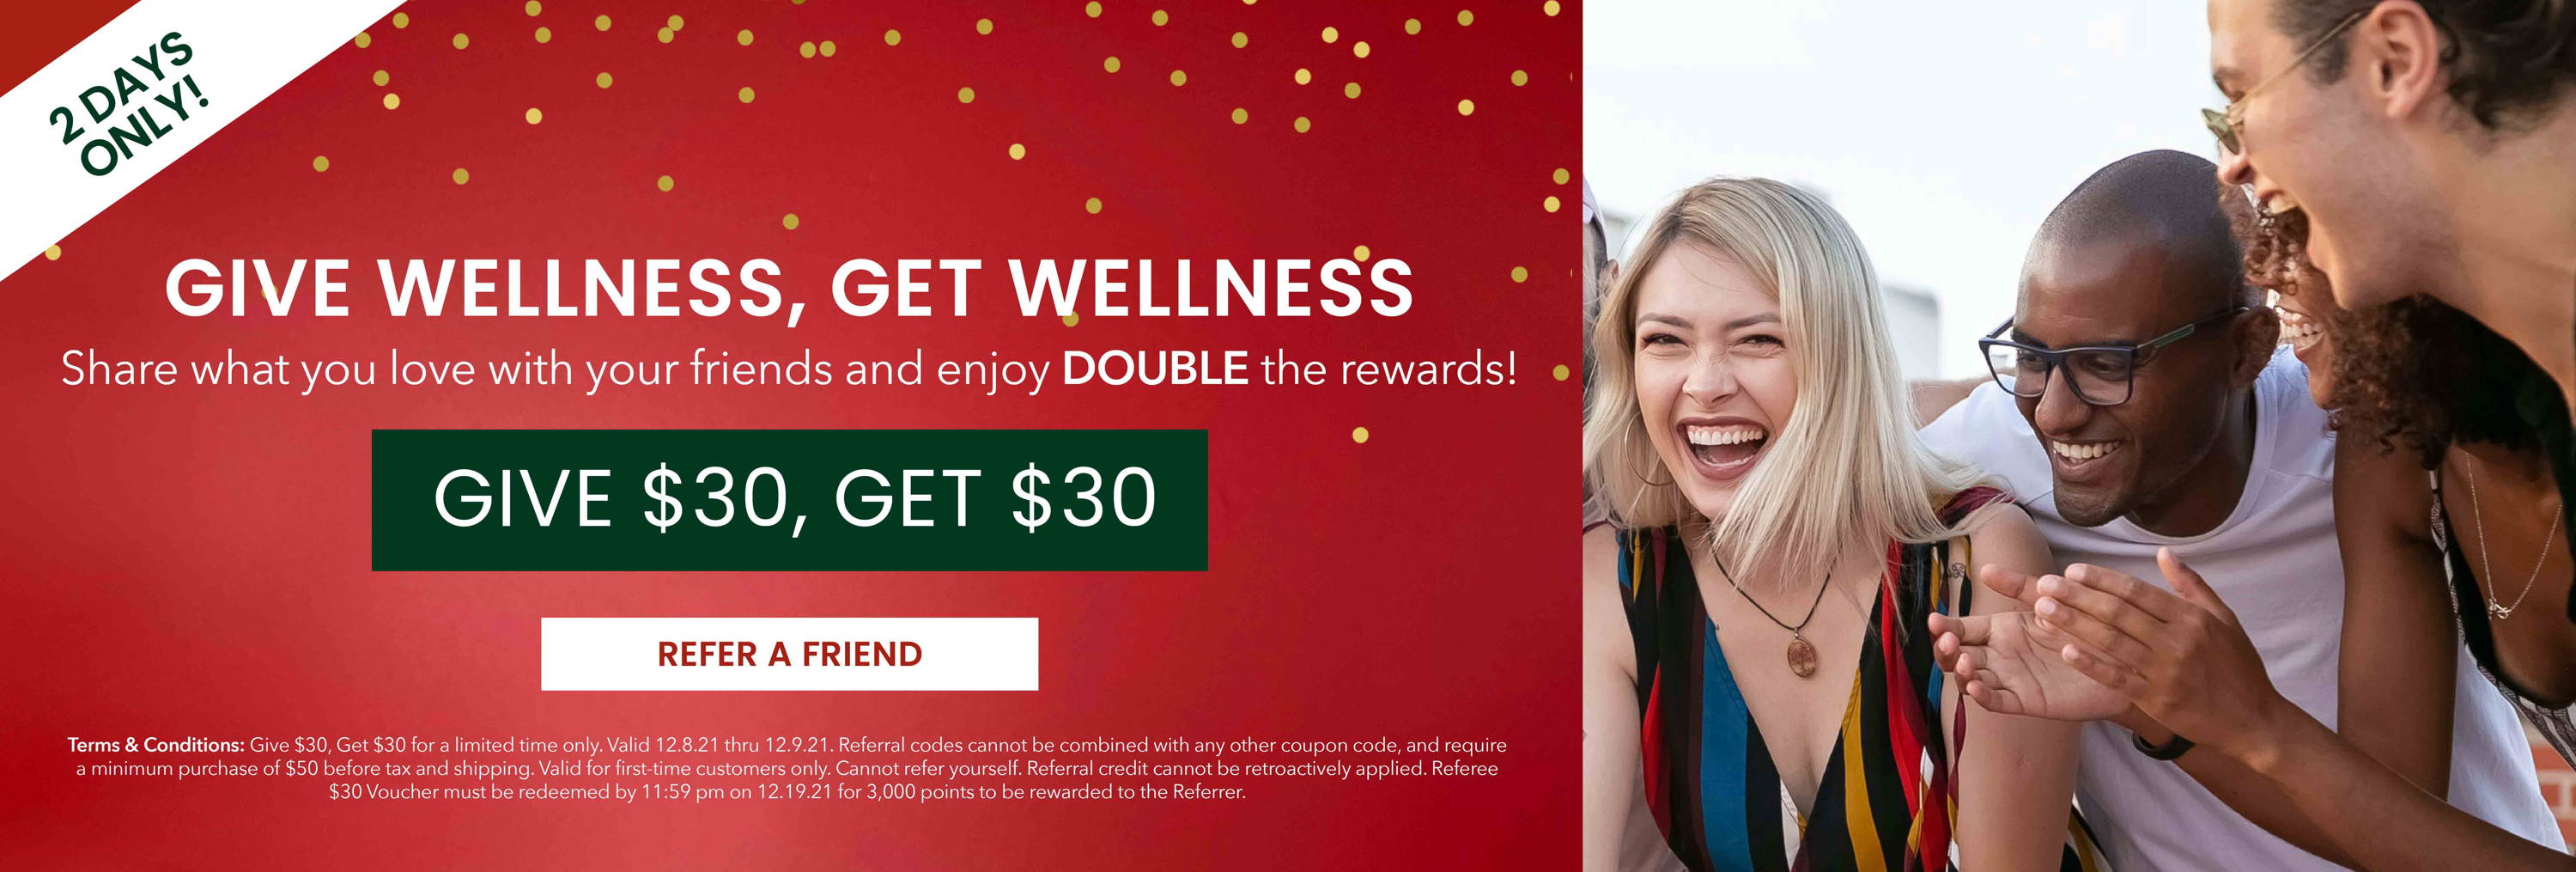 Limited Time Only! Give $30, Get $30 when your refer your friends.